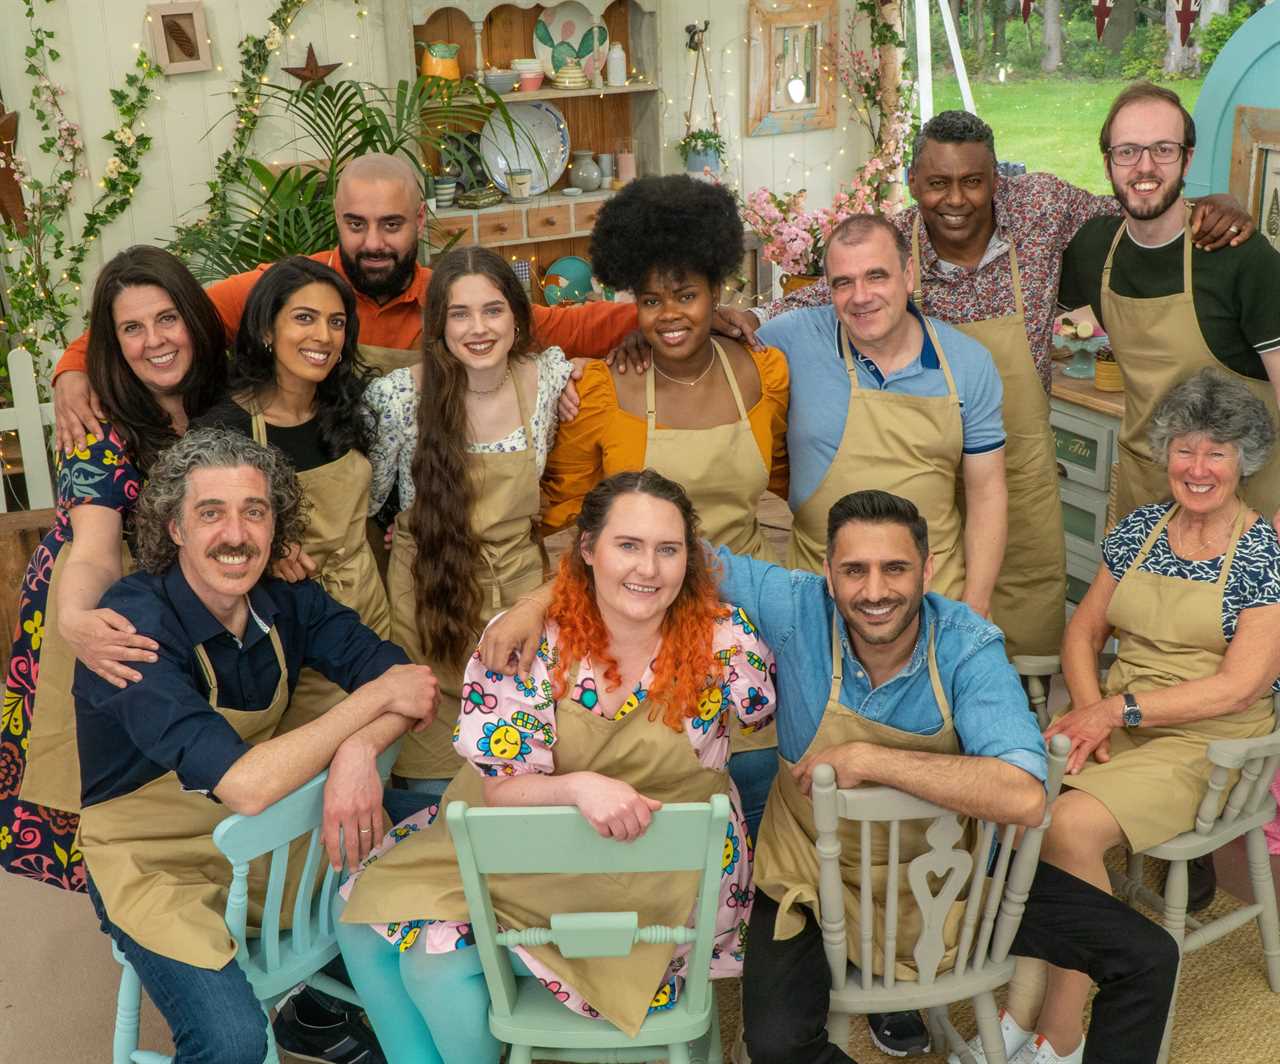 I was on Bake Off – it was so physically hard I thought I would SCREAM by the end of filming